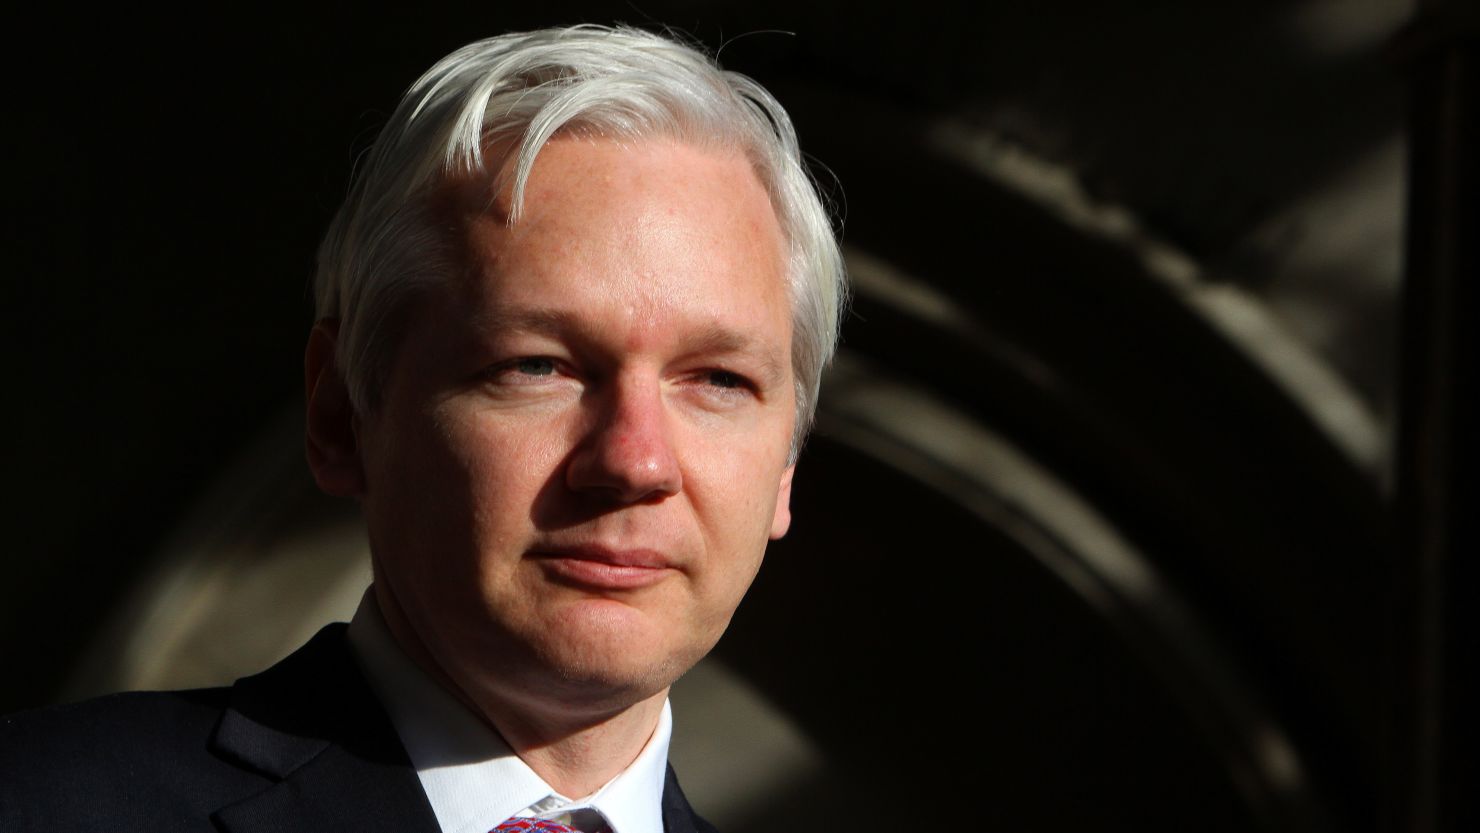 A court has ruled that WikiLeaks founder Julian Assange's application fighting extradition is "without merit."